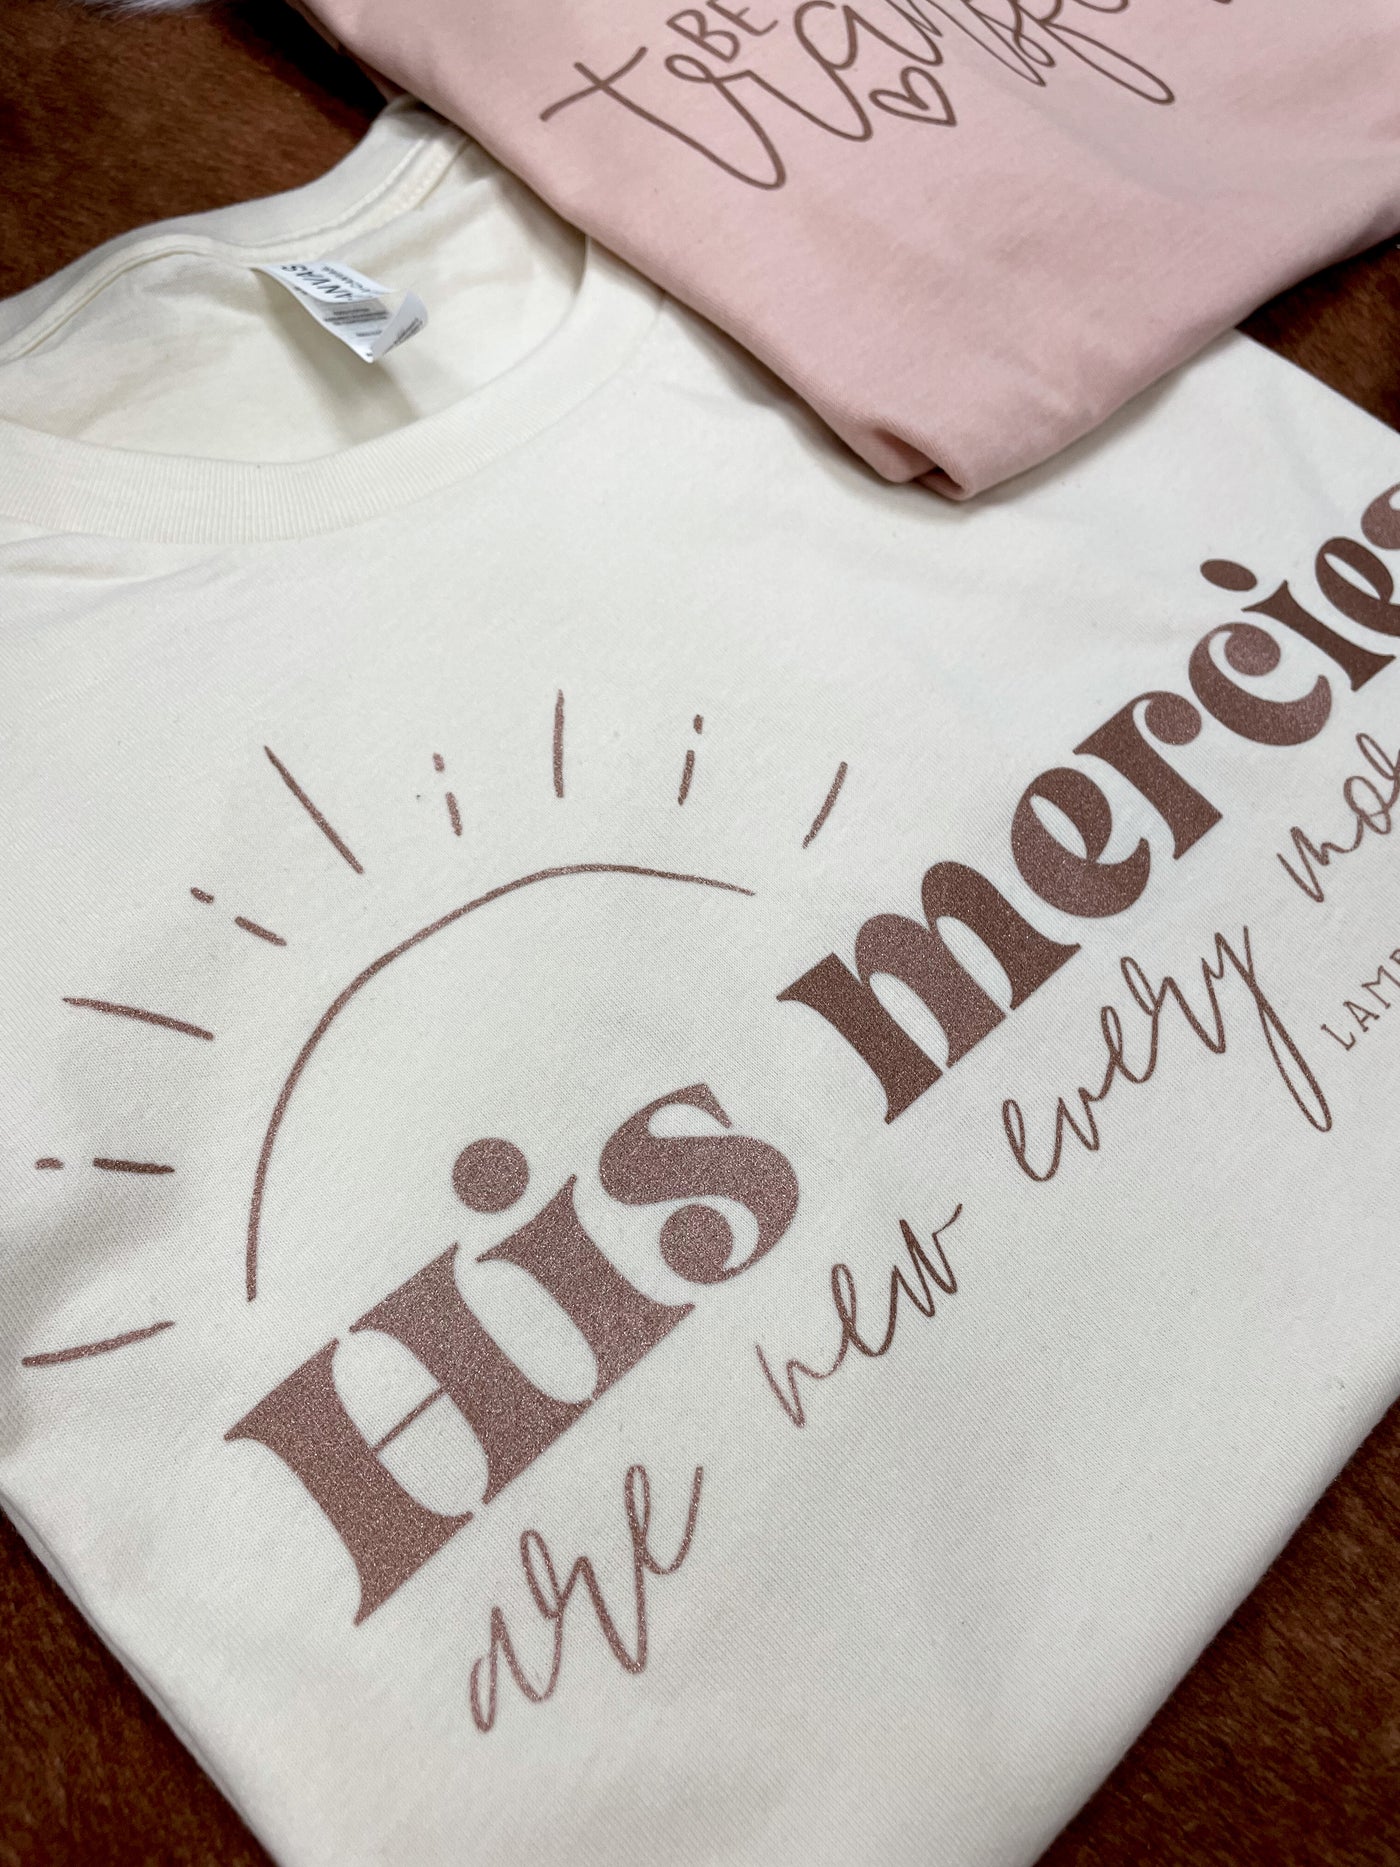 ✨Metallic Rose Gold Ink✨ “His Mercies are New Every Morning - Lamentations 3:23" T-shirt